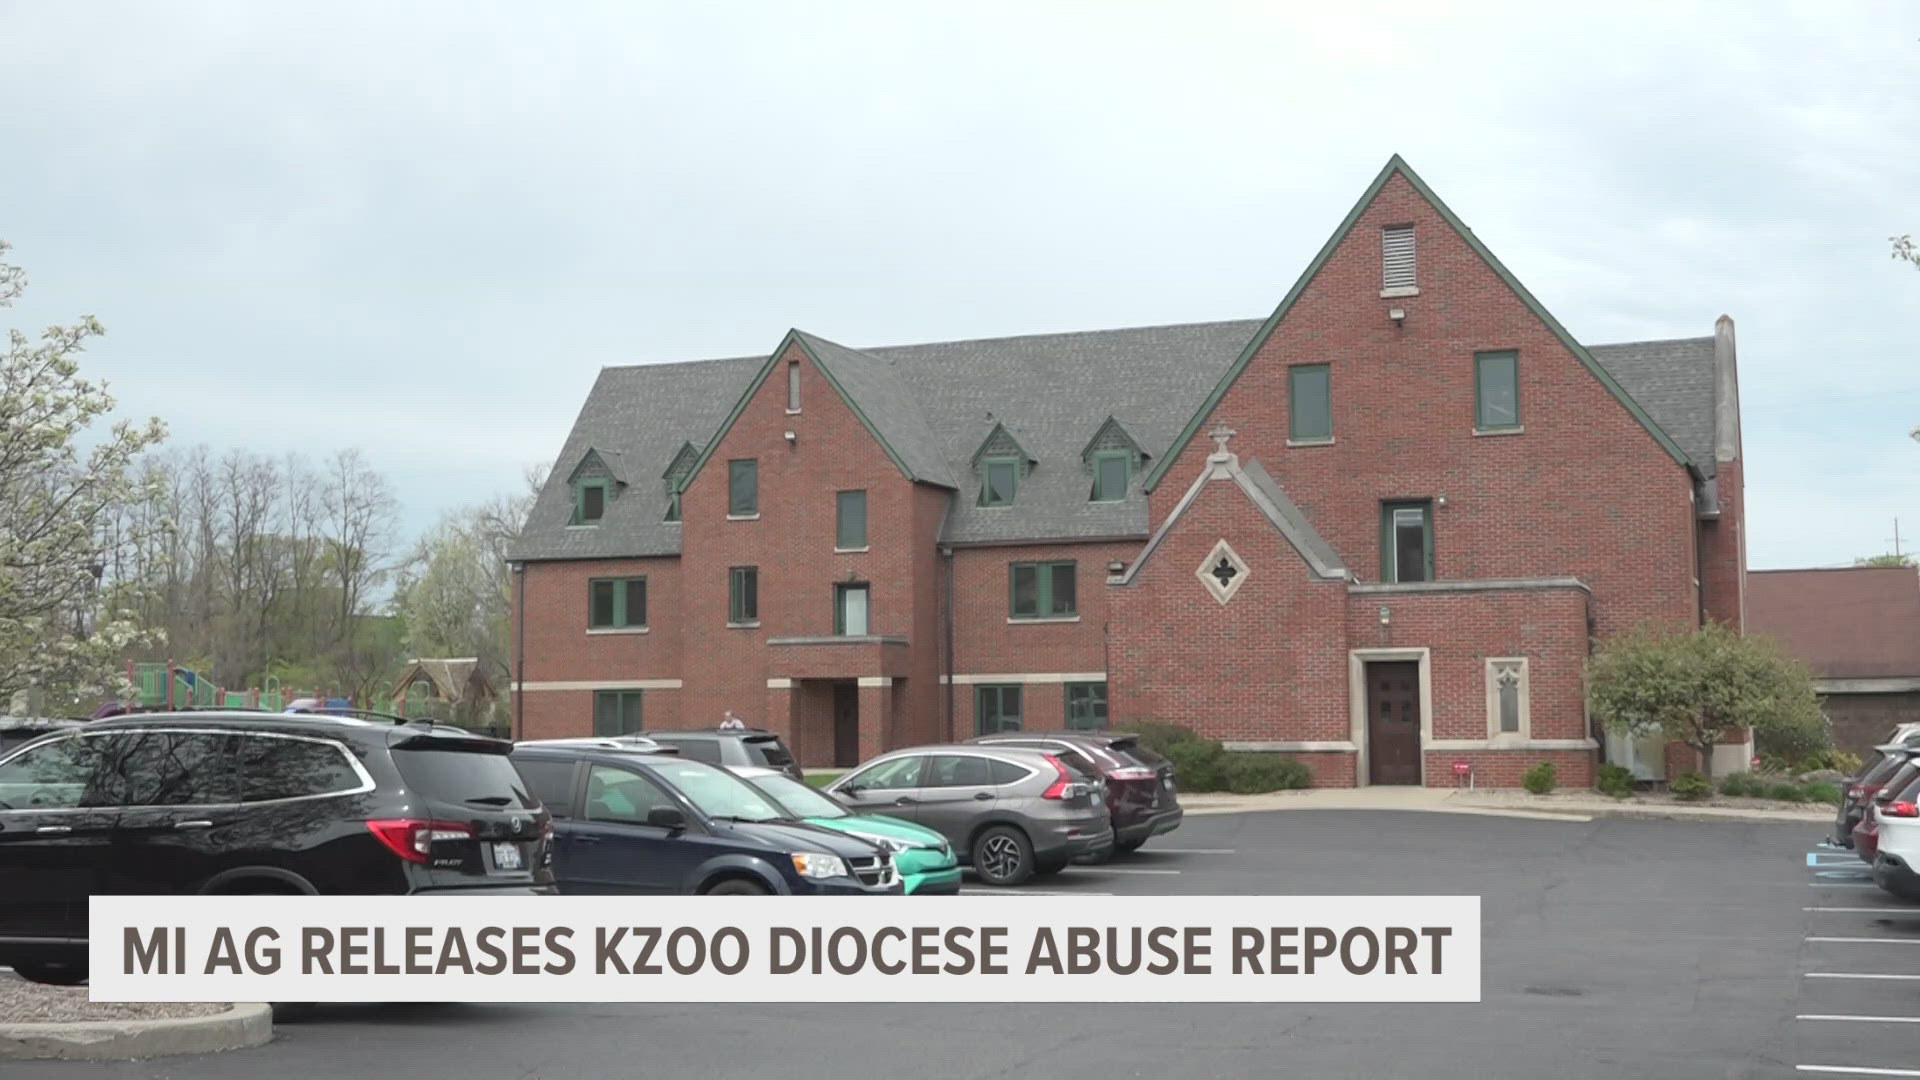 The Michigan Attorney General shared a document concerning allegations of abuse that took place in the Diocese of Kalamazoo.